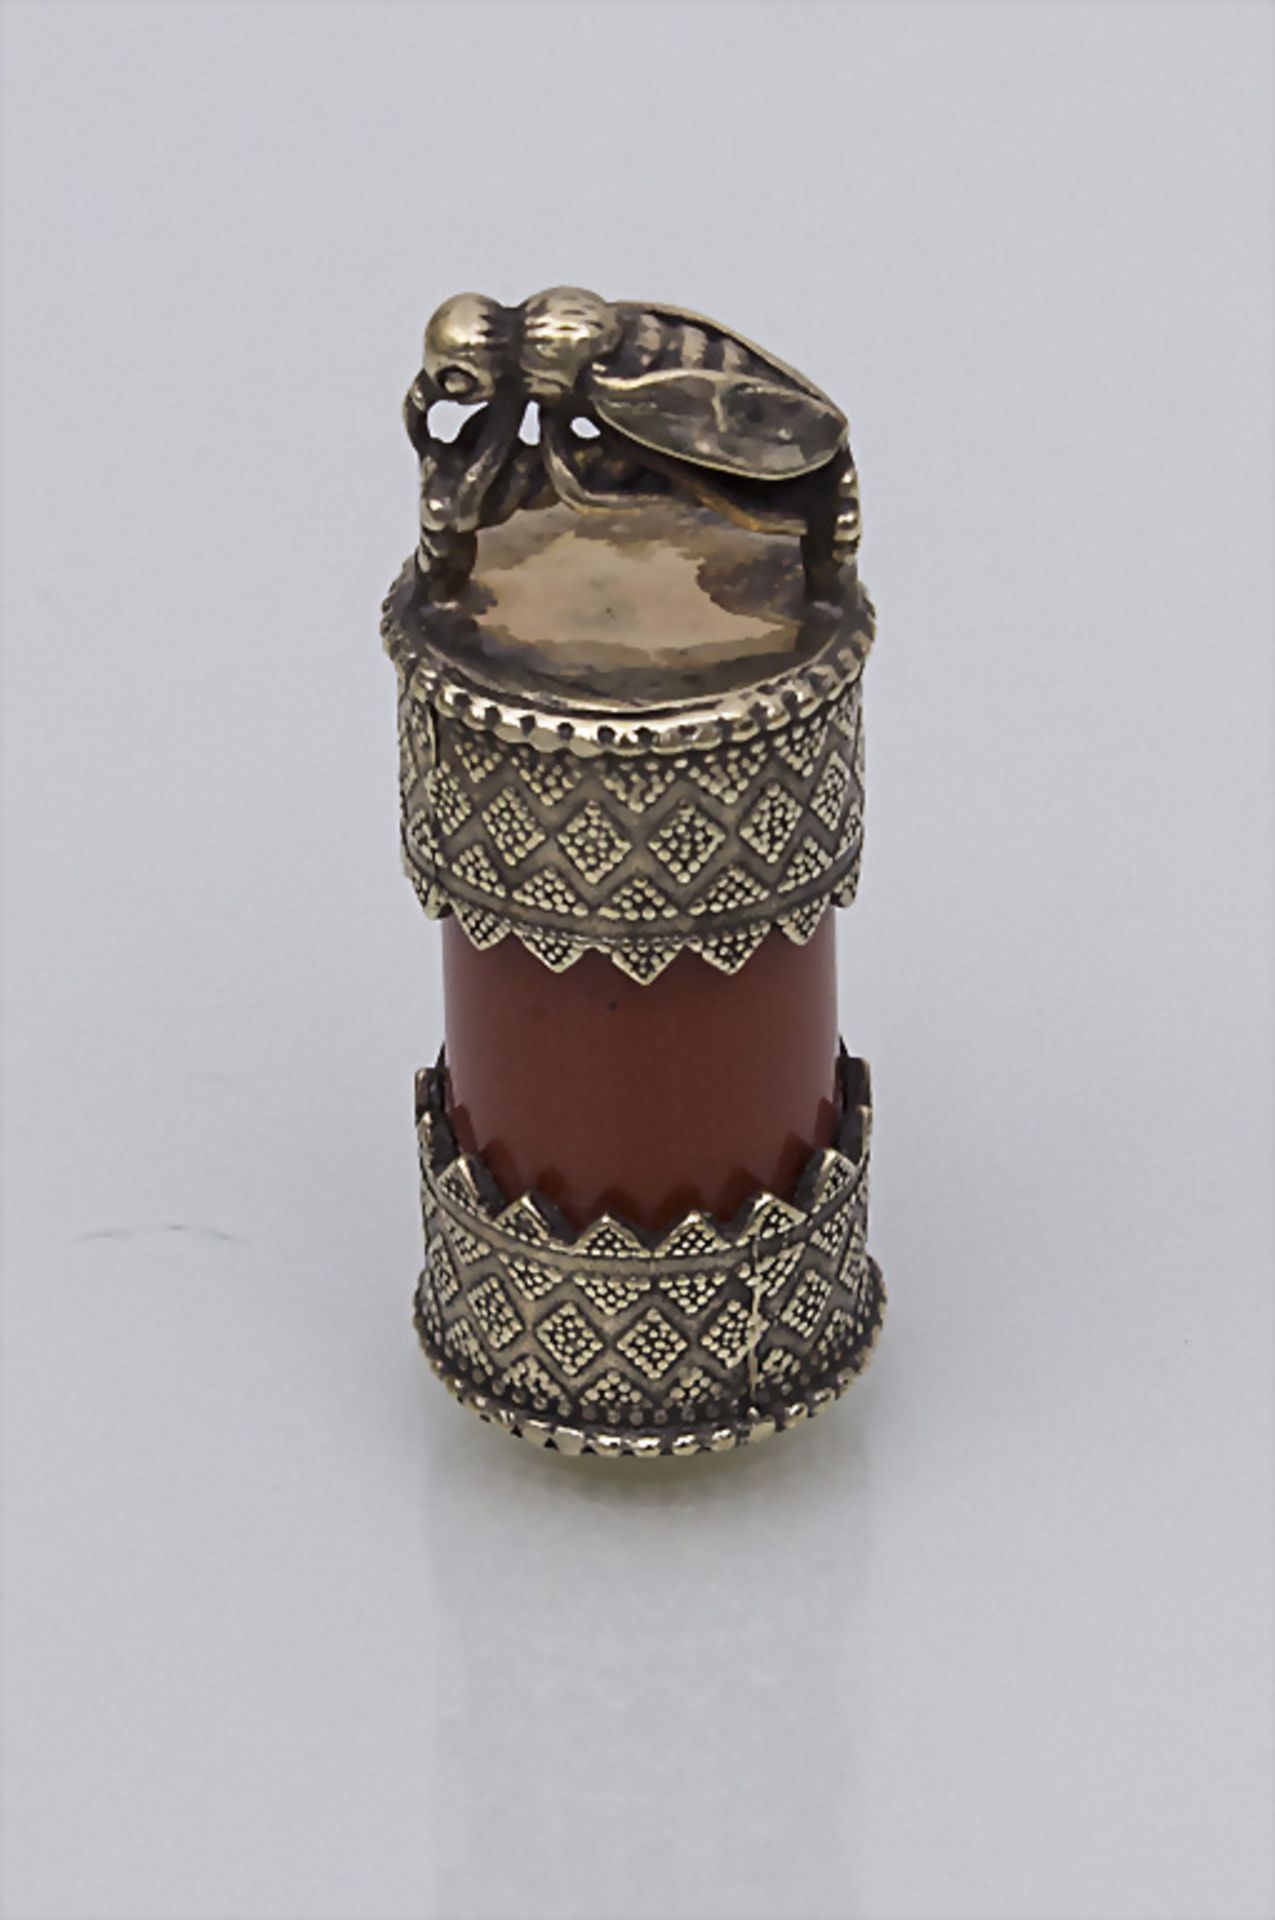 Karneol-Anhänger mit Insekt / A Carnelian pendant with insect